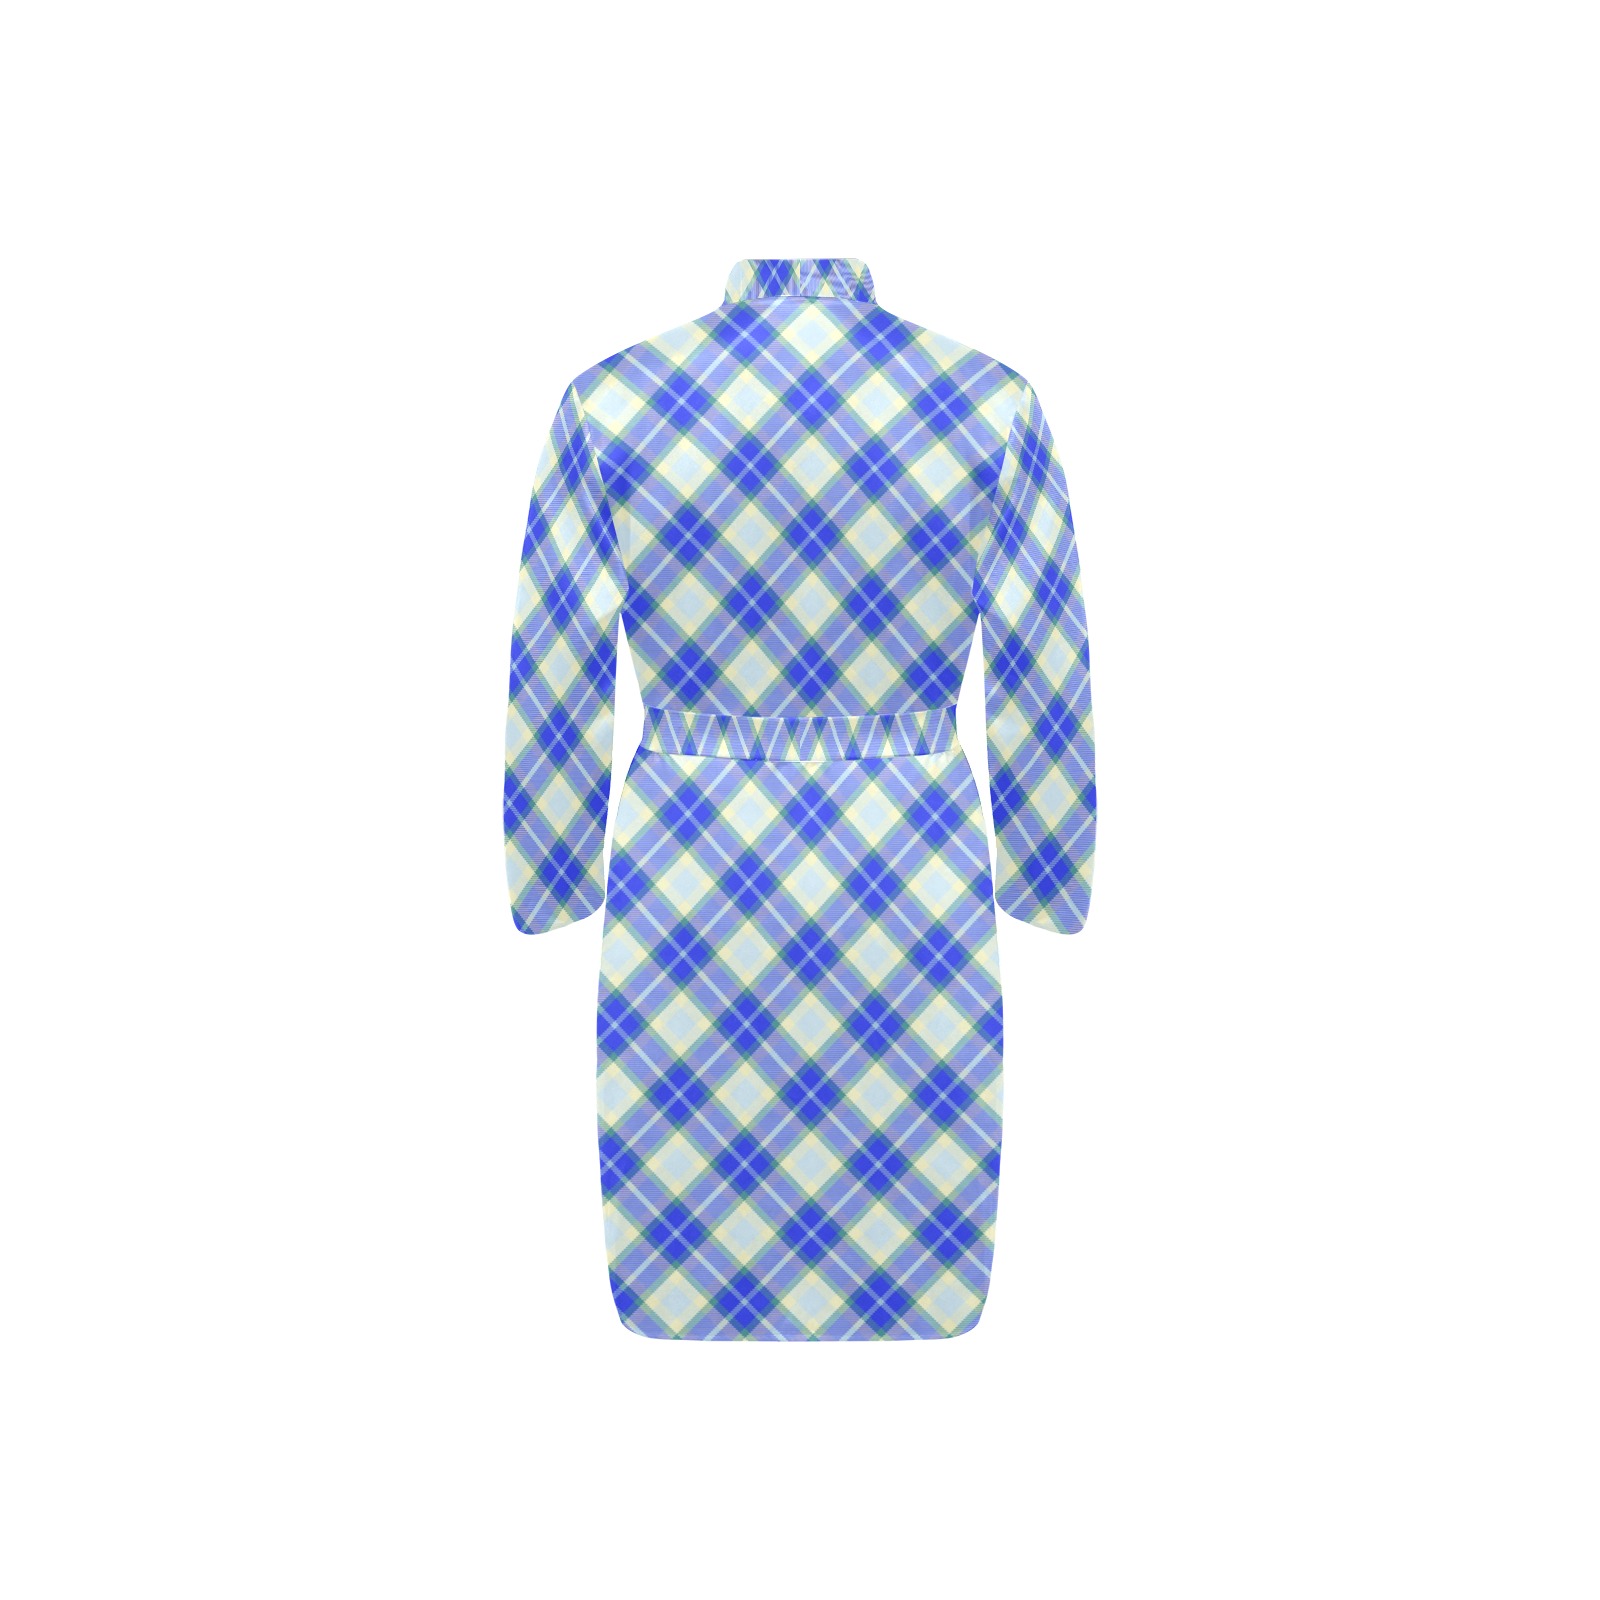 Blue Yellow Plaid Men's Long Sleeve Belted Night Robe (Model H56)